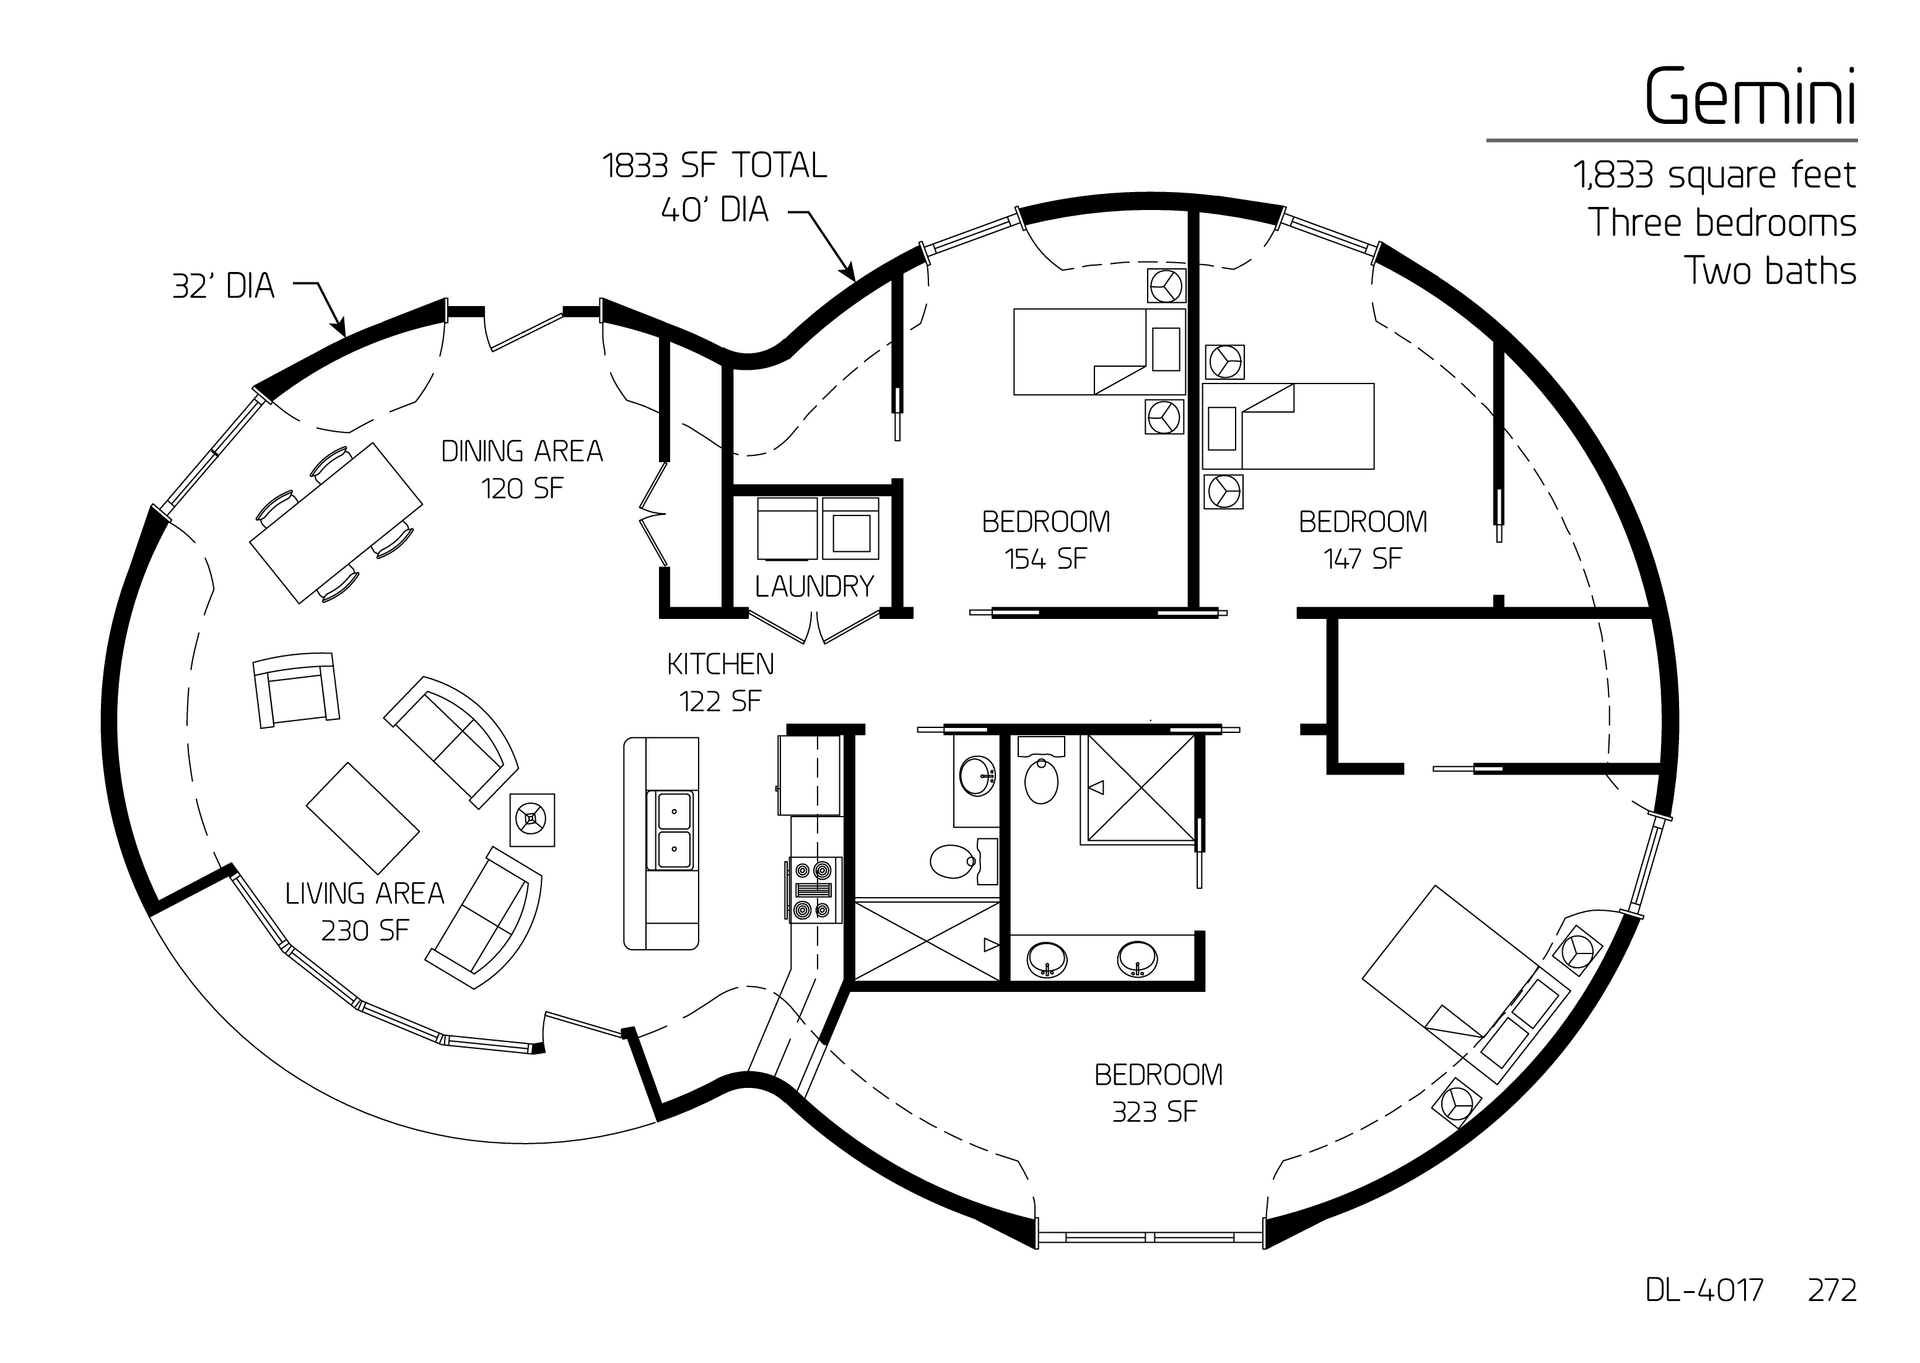 Gemini: A 32' and 40' Double Domed, 1,833 SF, Three-Bedrooms, Two-Baths.